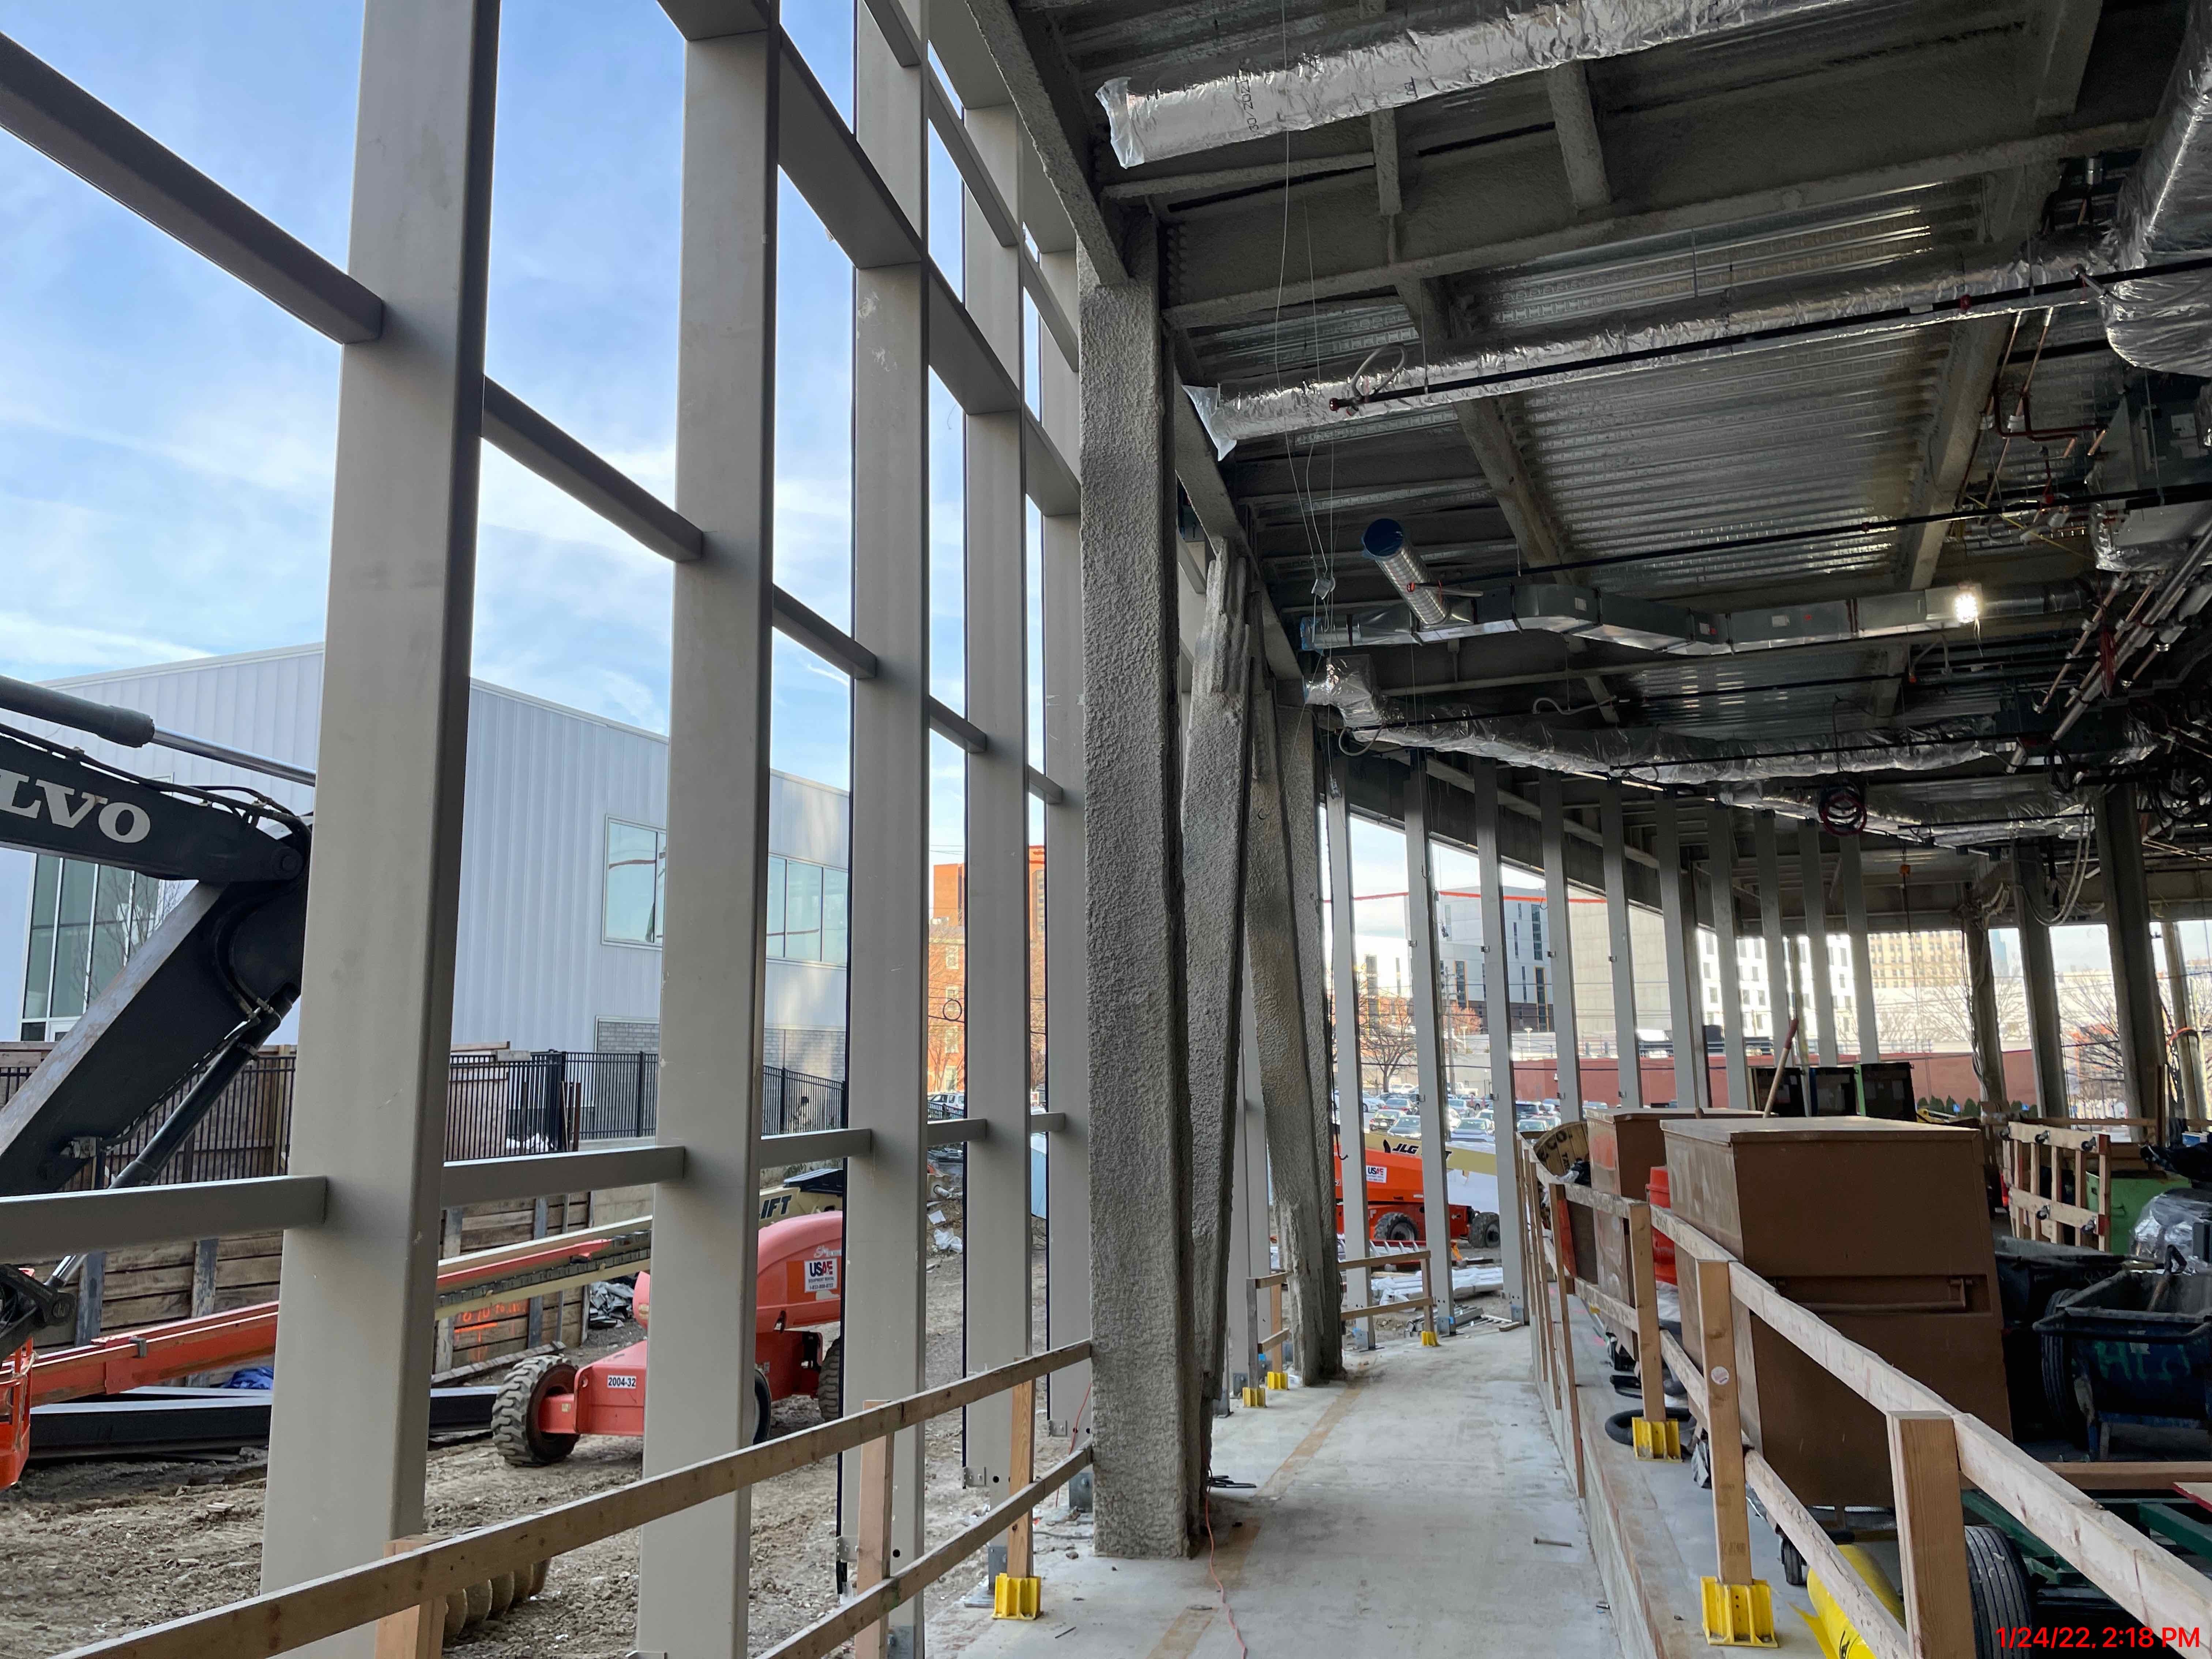 Ground floor of the Health Sciences Building looking north